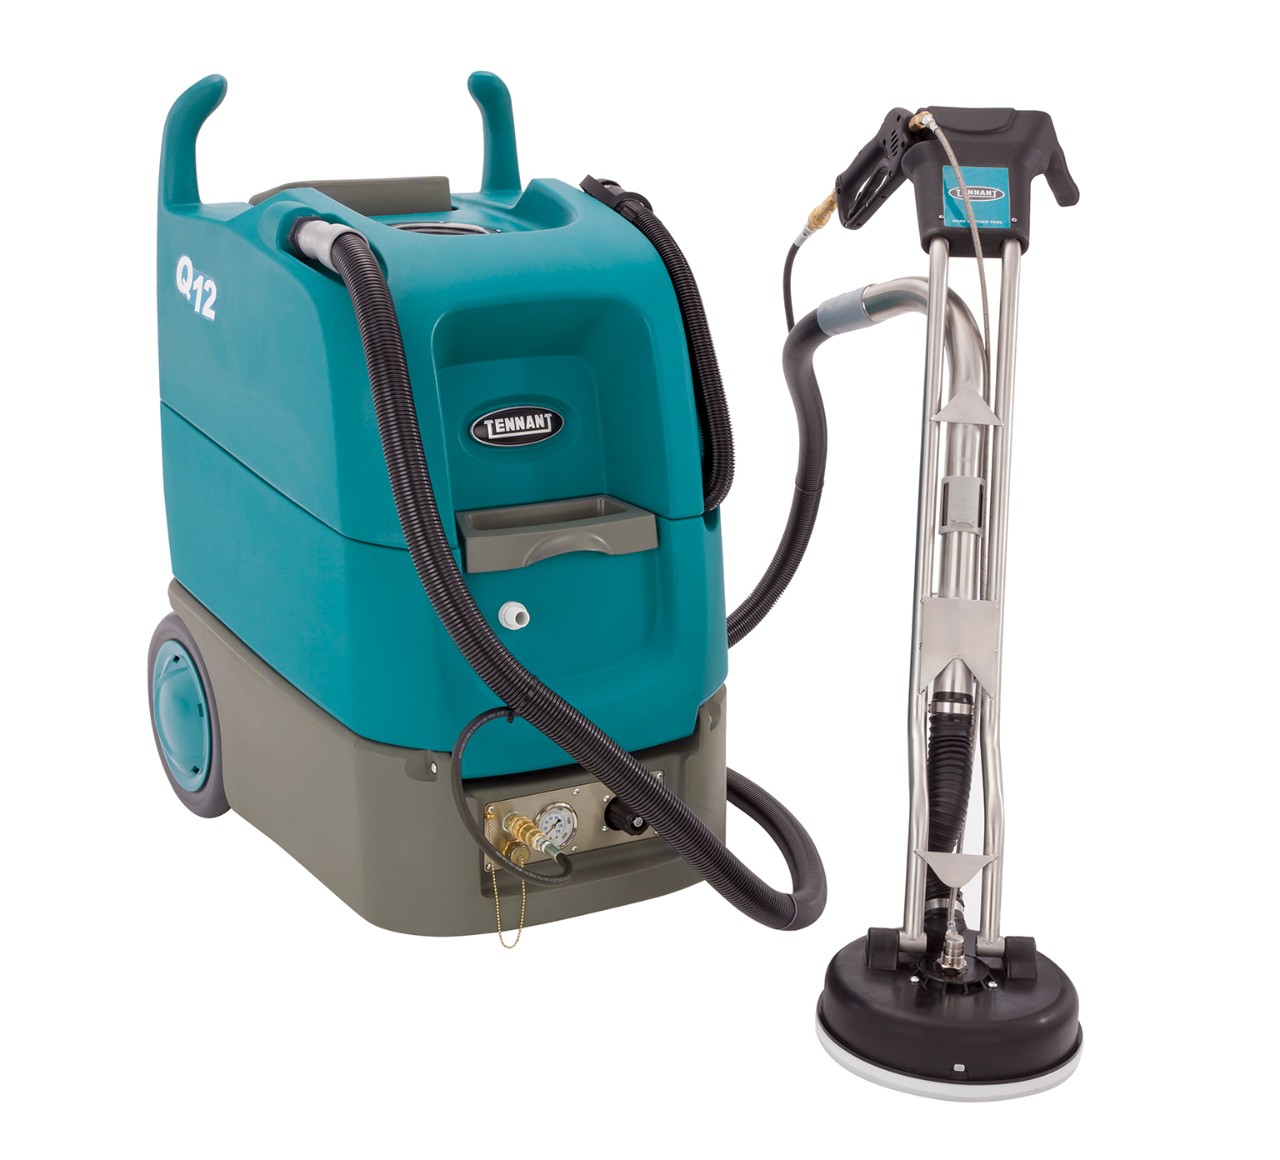 Q12 Multi-Surface Cleaning Machine